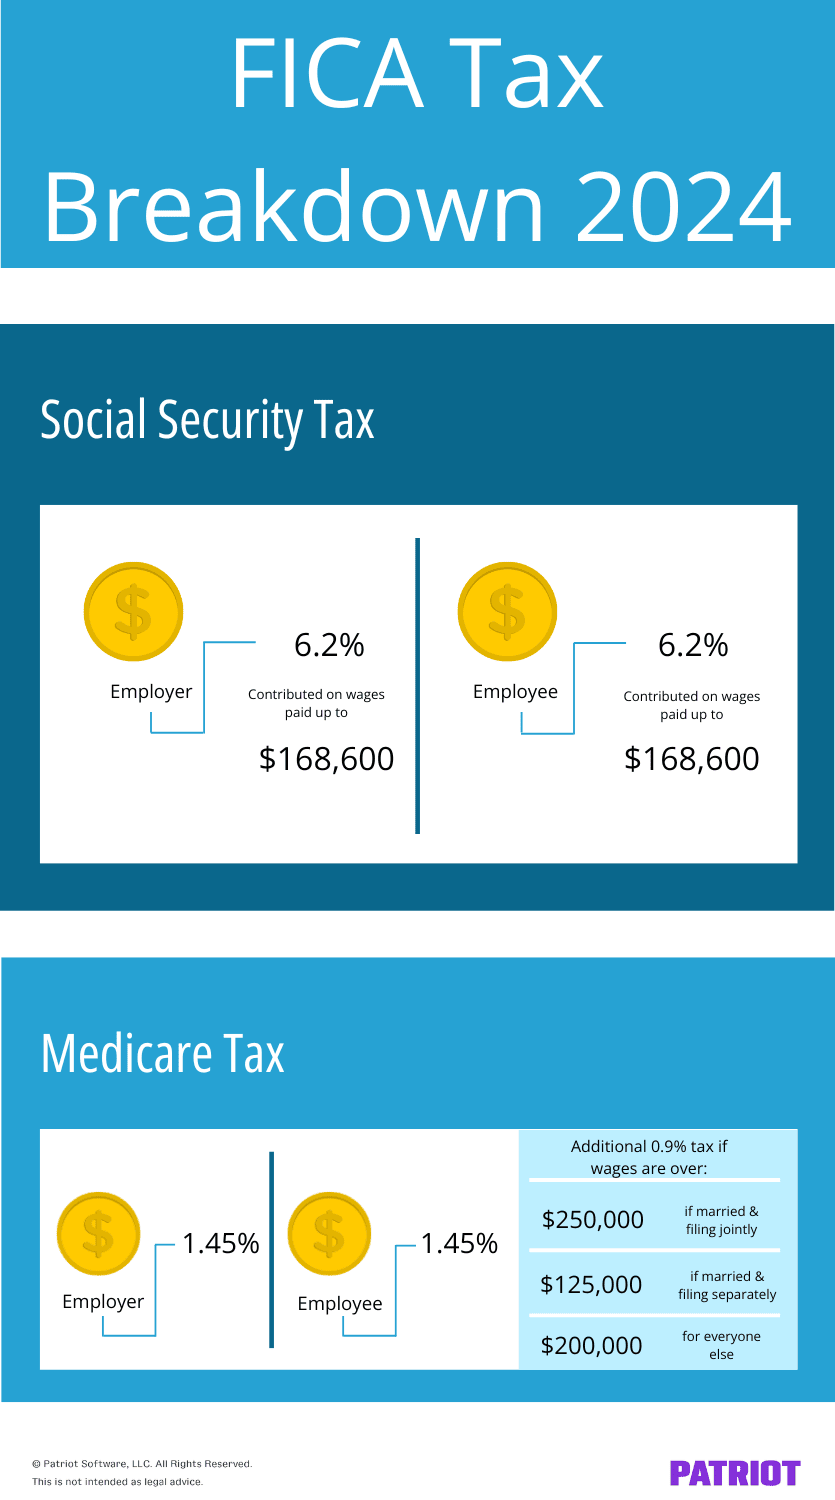 FICA Tax breakdown 2024: Social Security (employee and employer: 6.2% each, contributed on wages paid up to $168,600); Medicare Tax: 1.45% each, contributed on all wages. additional 0.9% tax applies to employee portion if wages are over a certain threshold. 